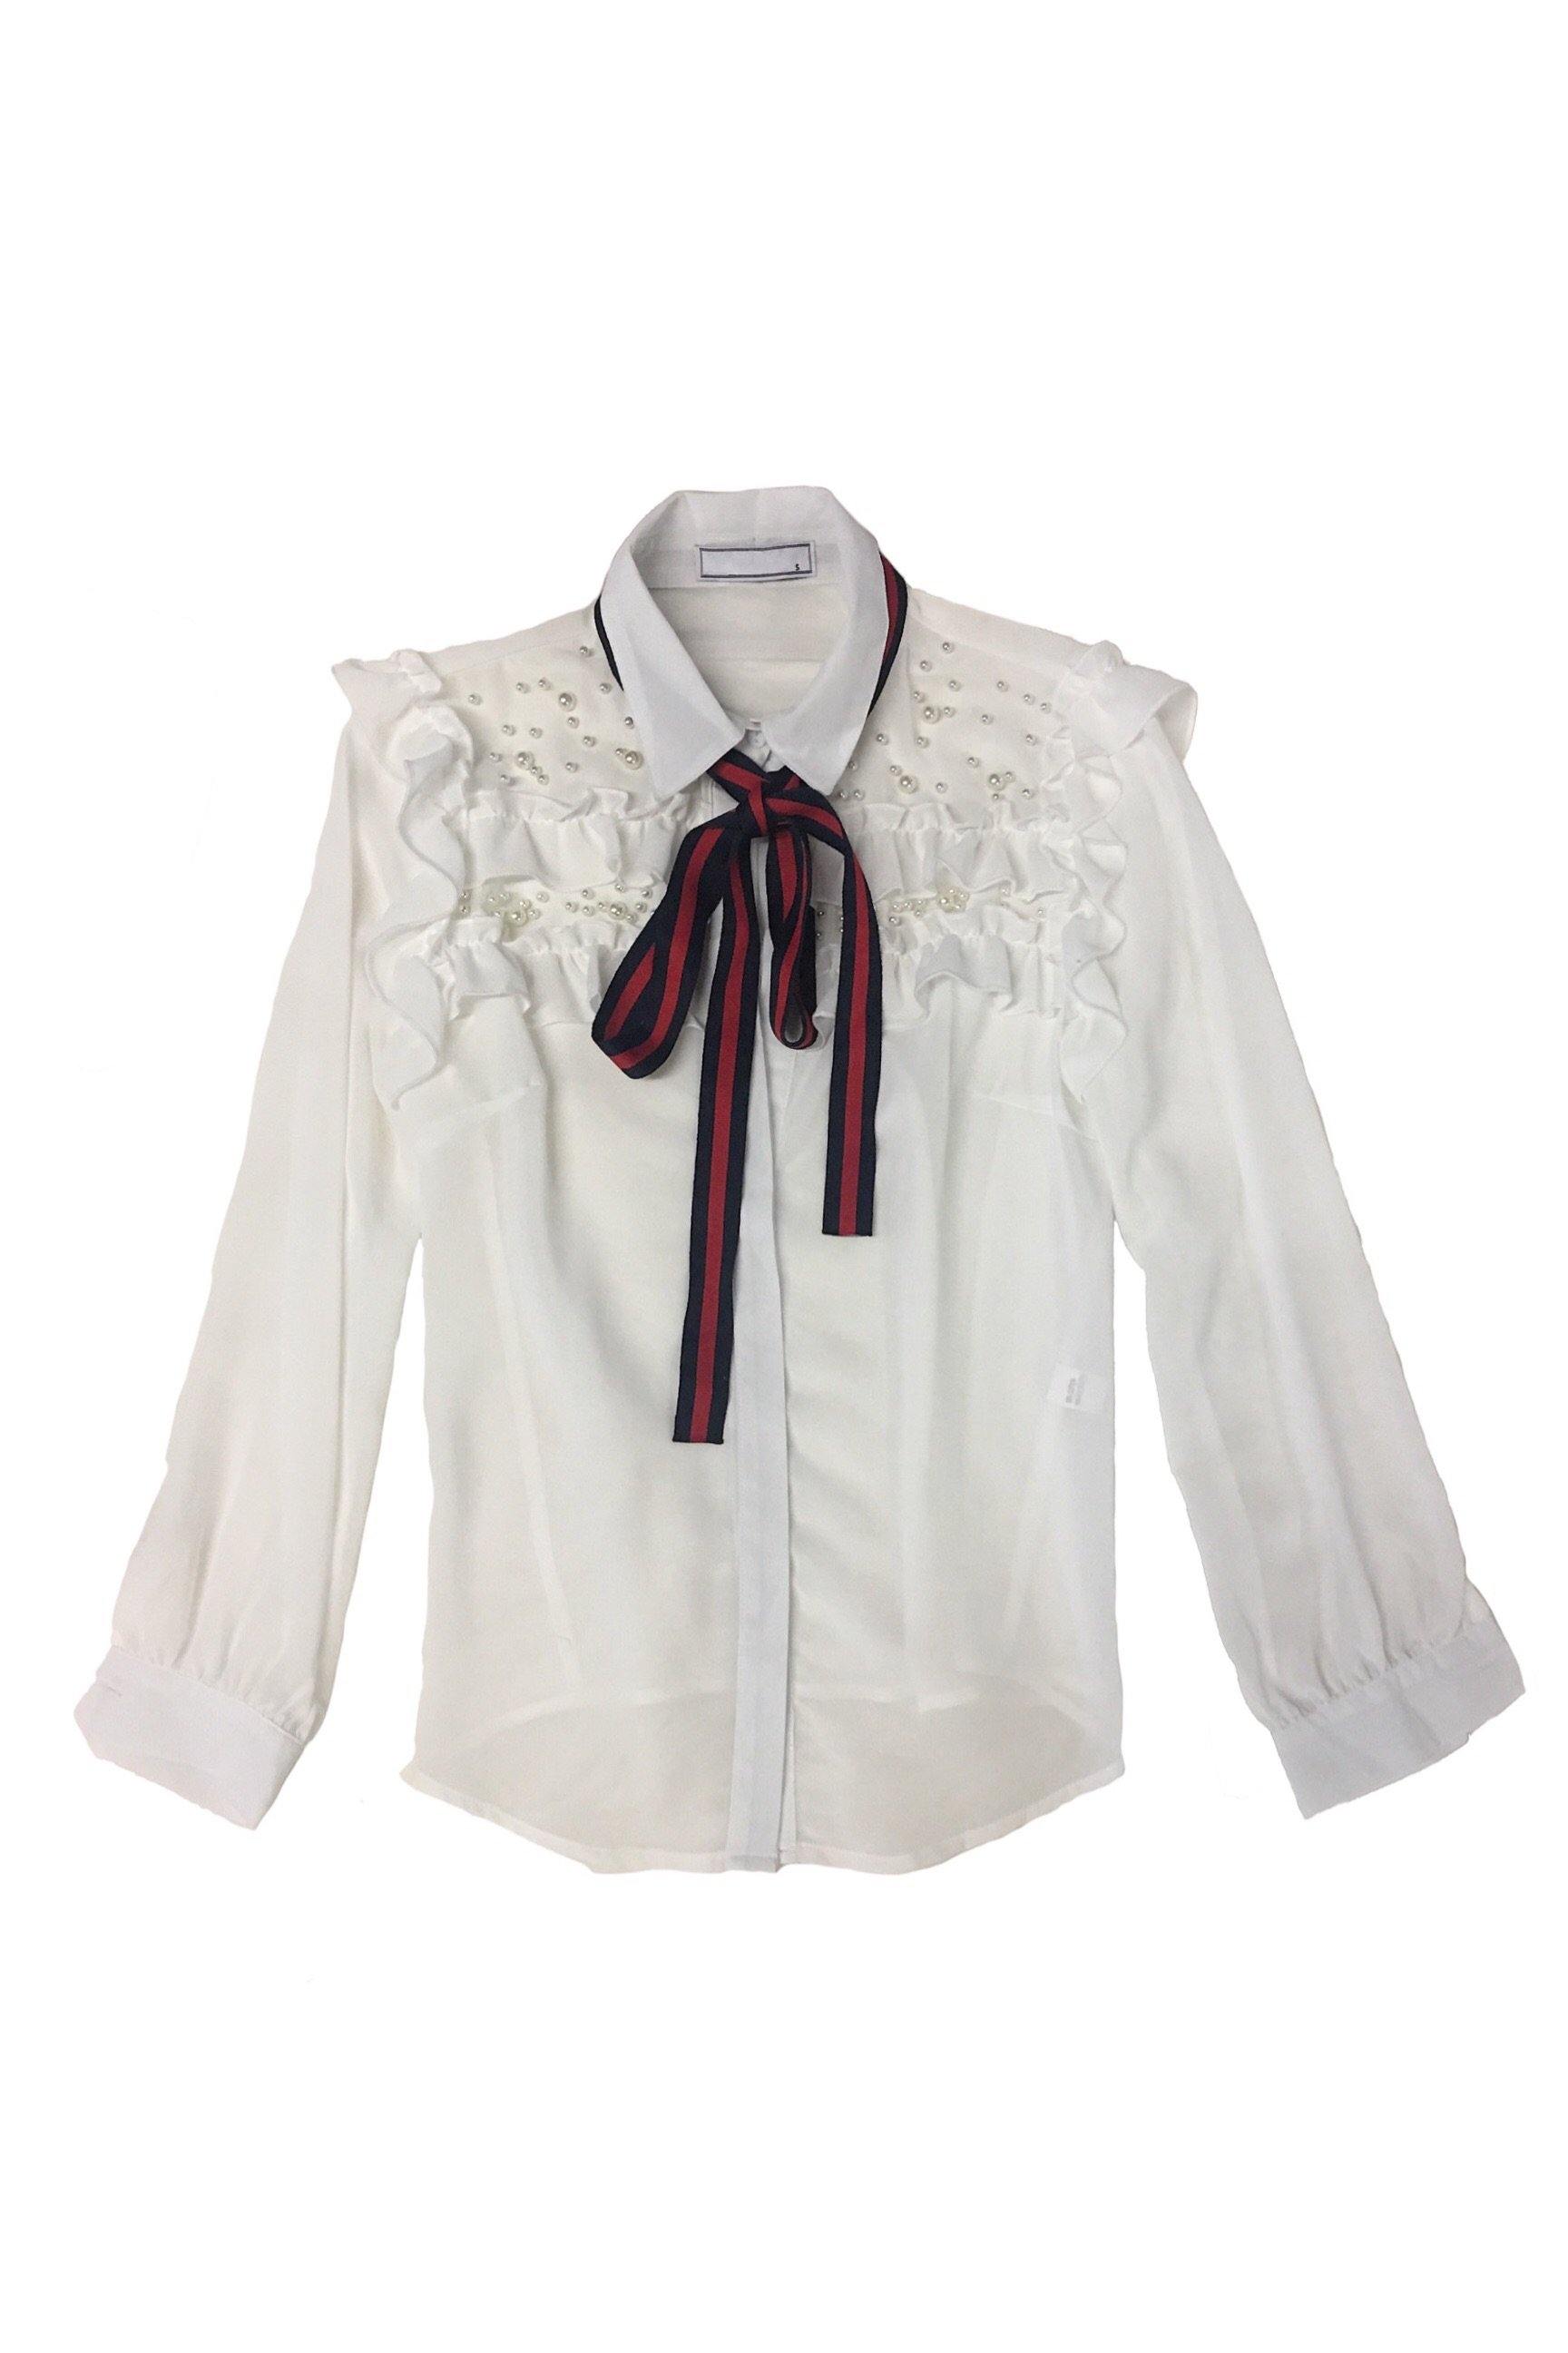 gucci inspired ruffle blouse